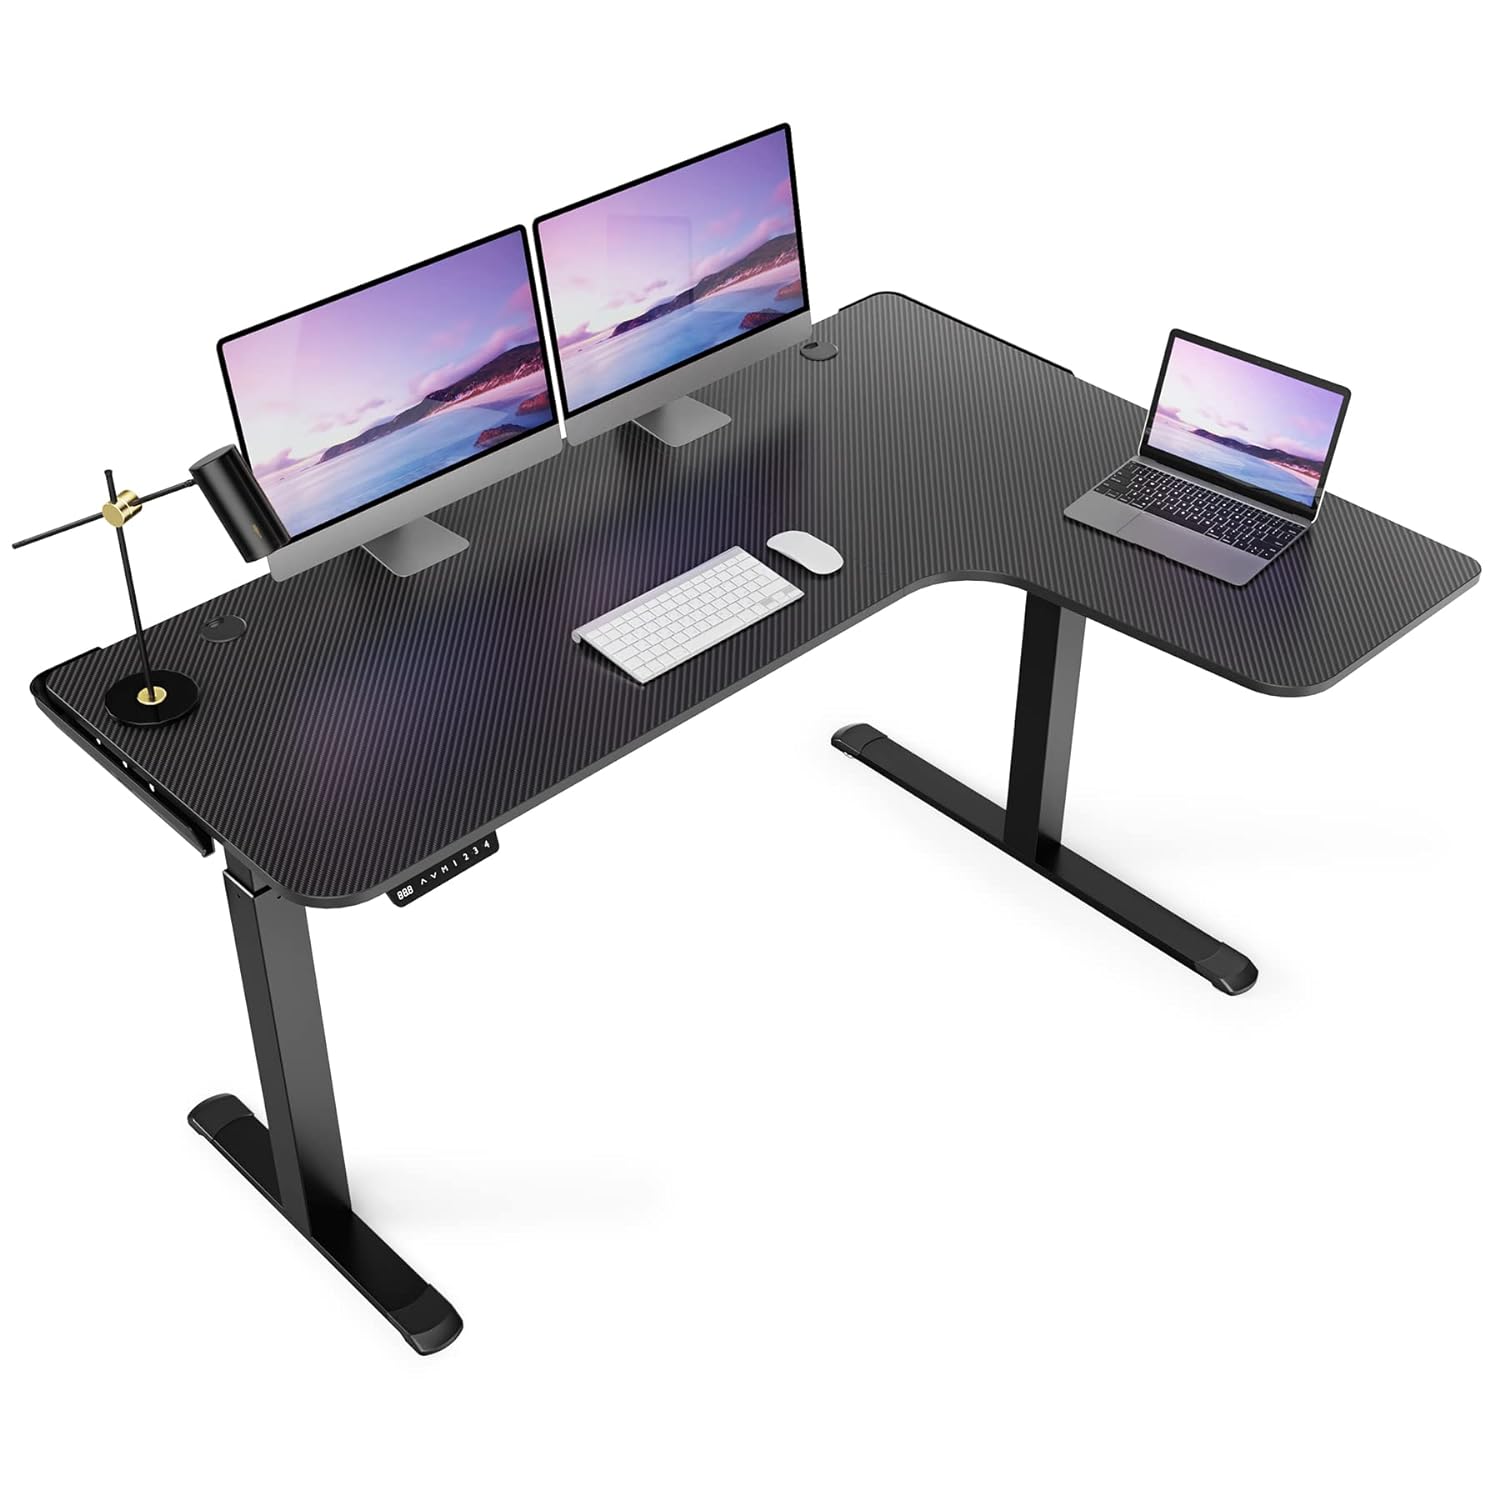 TKM Home DESIGNA 61 Inches L Shaped Standing Desk, Electric Height Adjustable Dual Motor Sit Stand Up Home Office Corner Computer Gami?